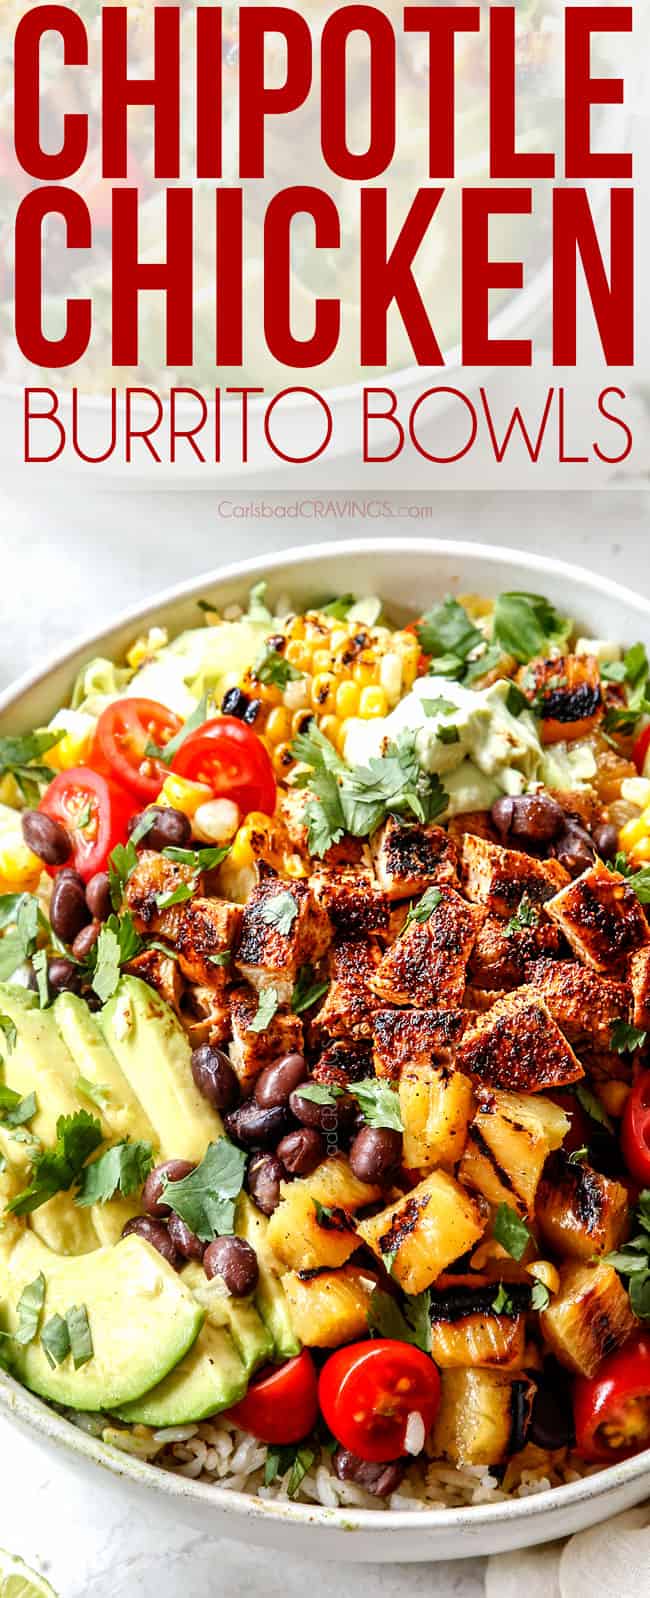 chicken burrito bowl with rice, beans, tomatoes, cheese, avocados